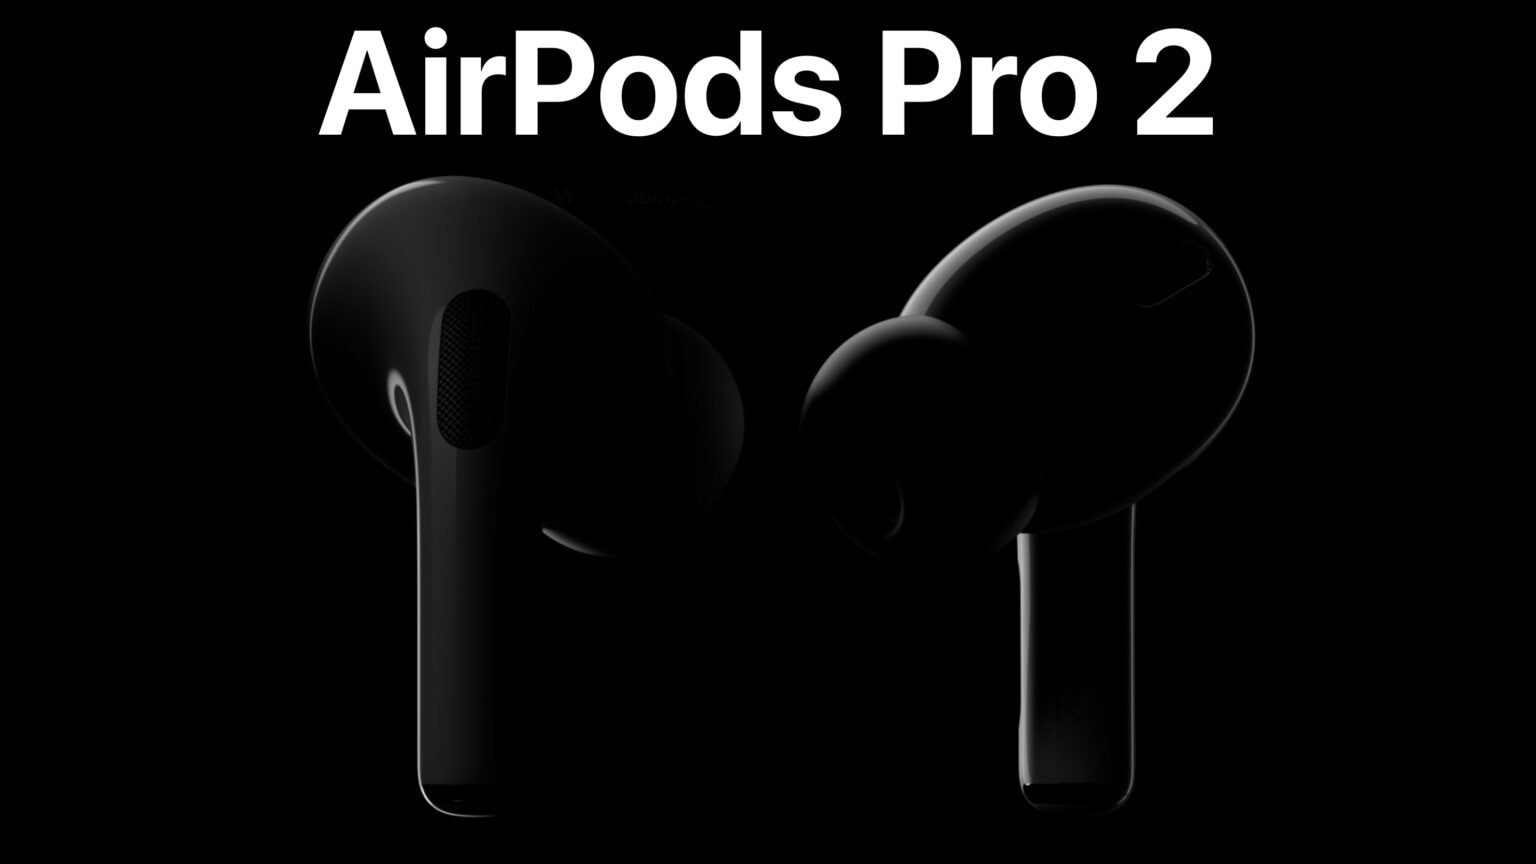 Everything we’re expecting from AirPods Pro 2